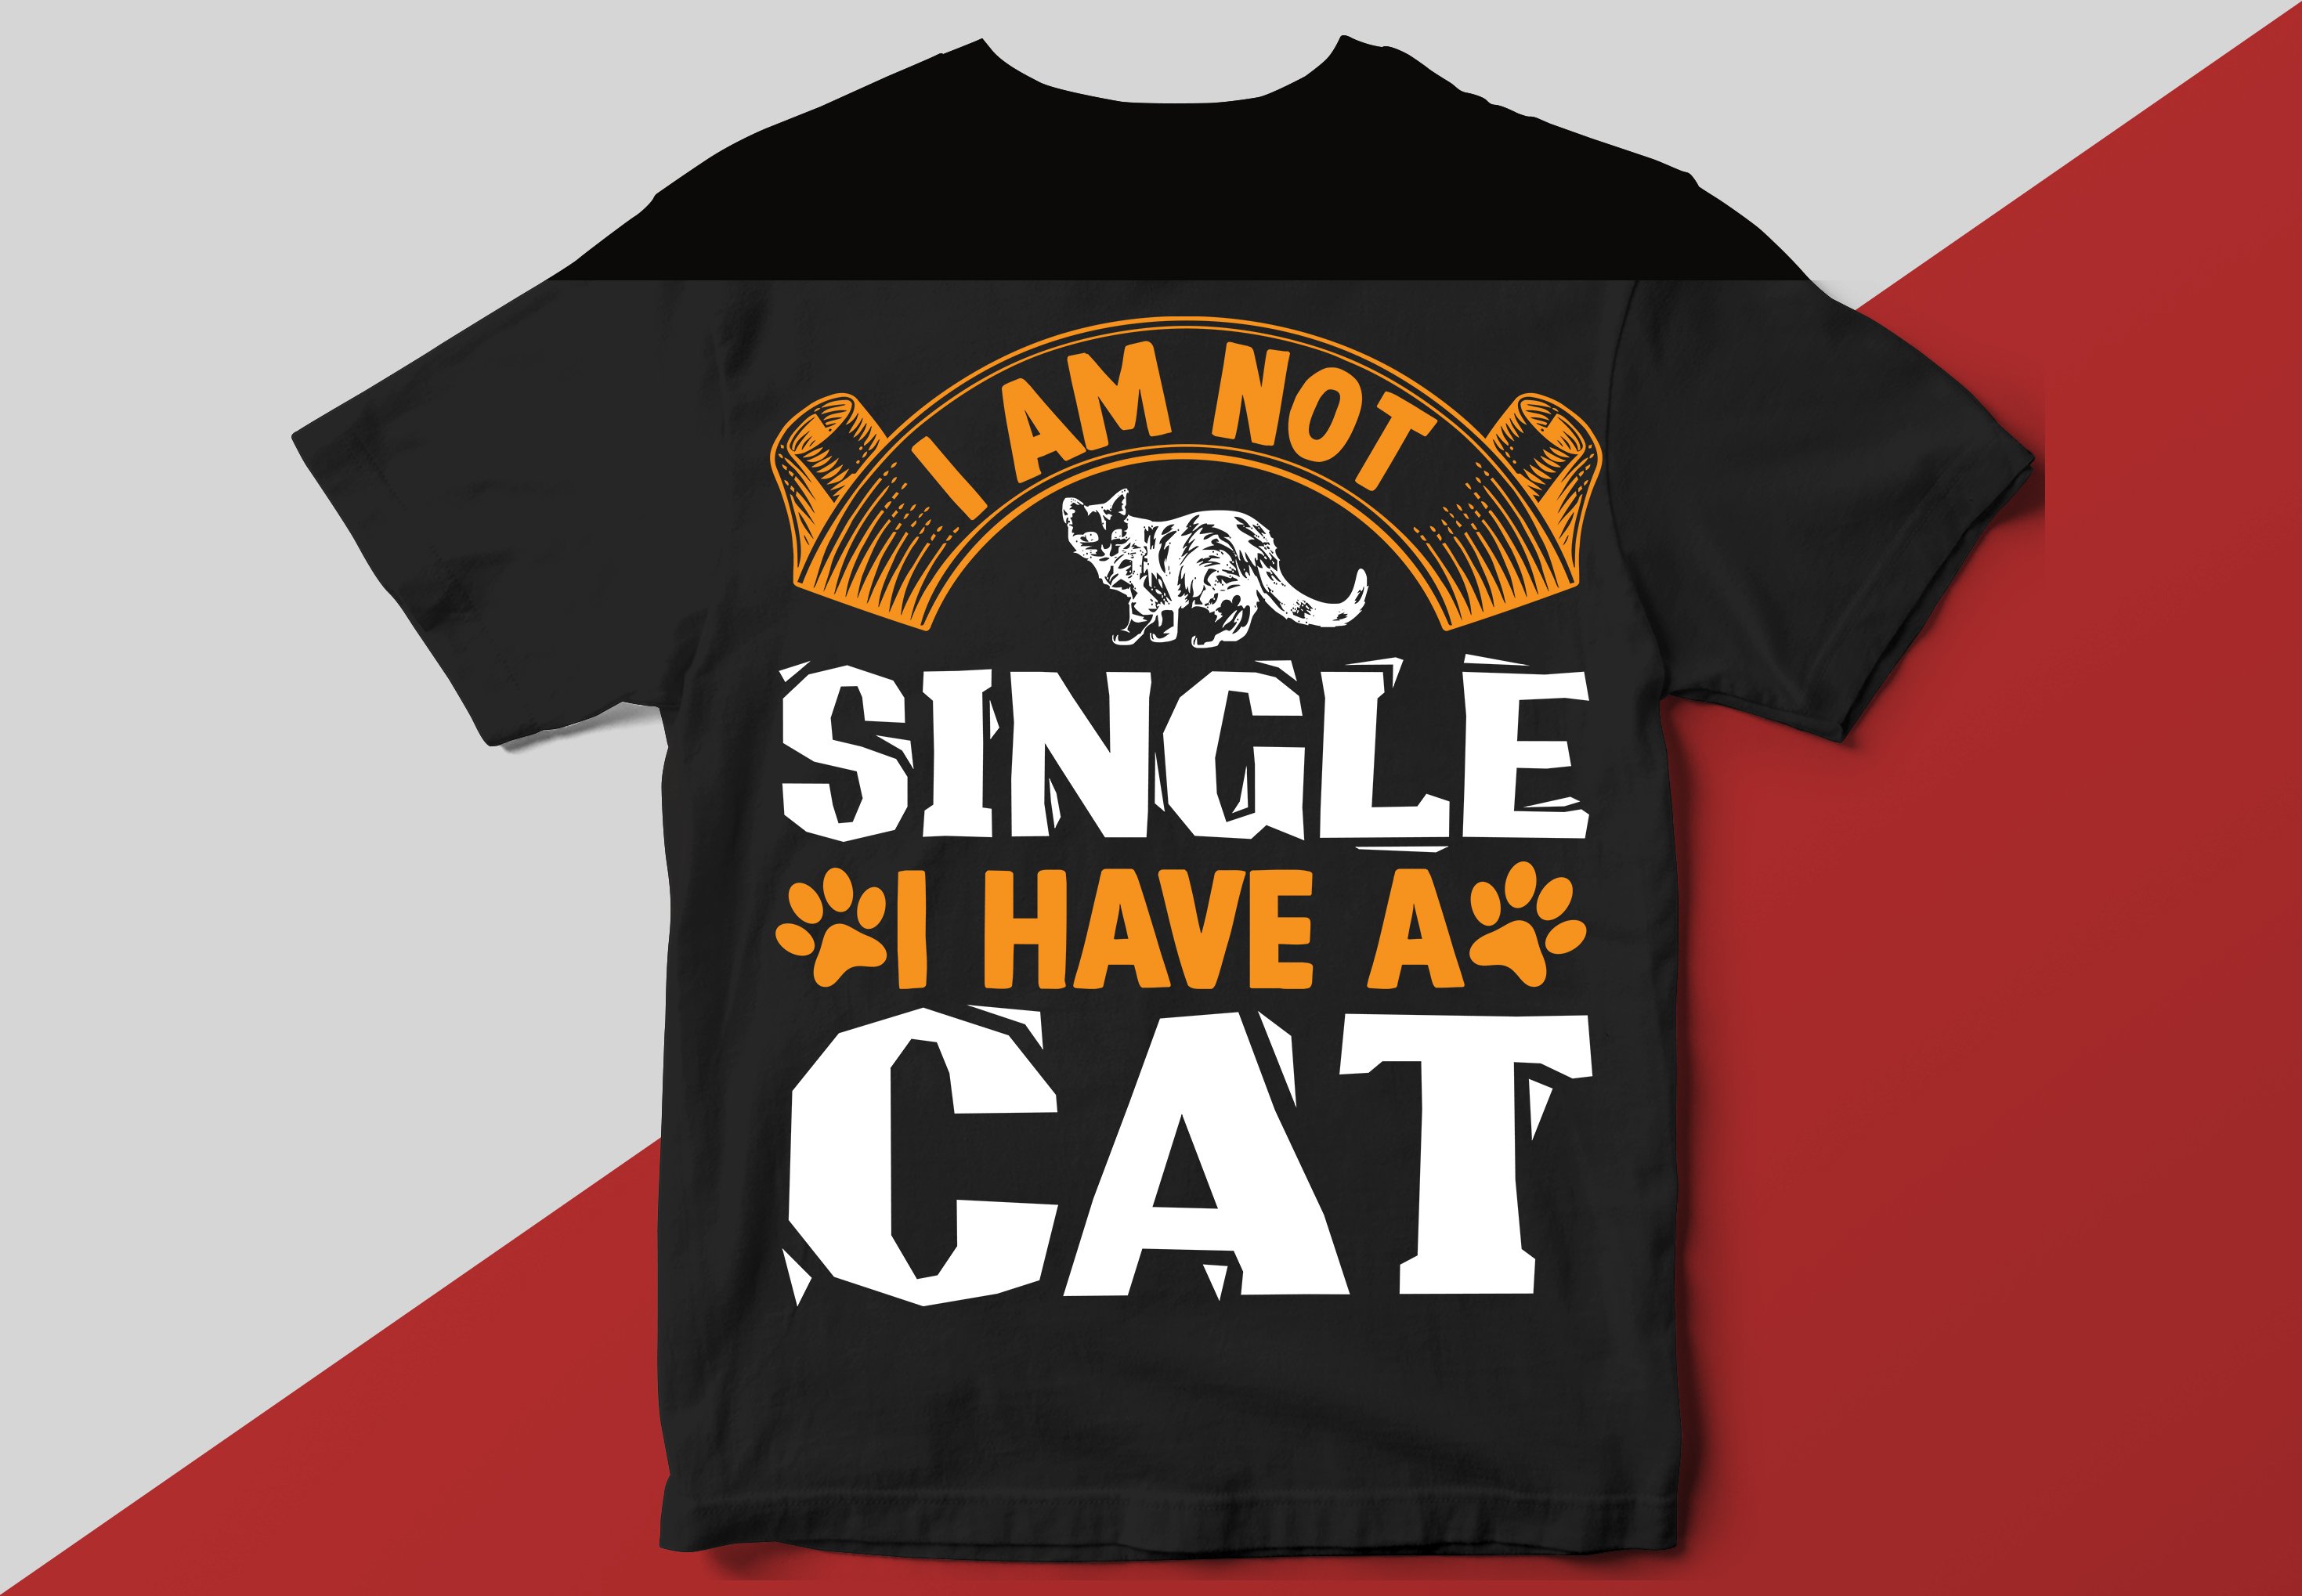 You are not single, you have a cat.